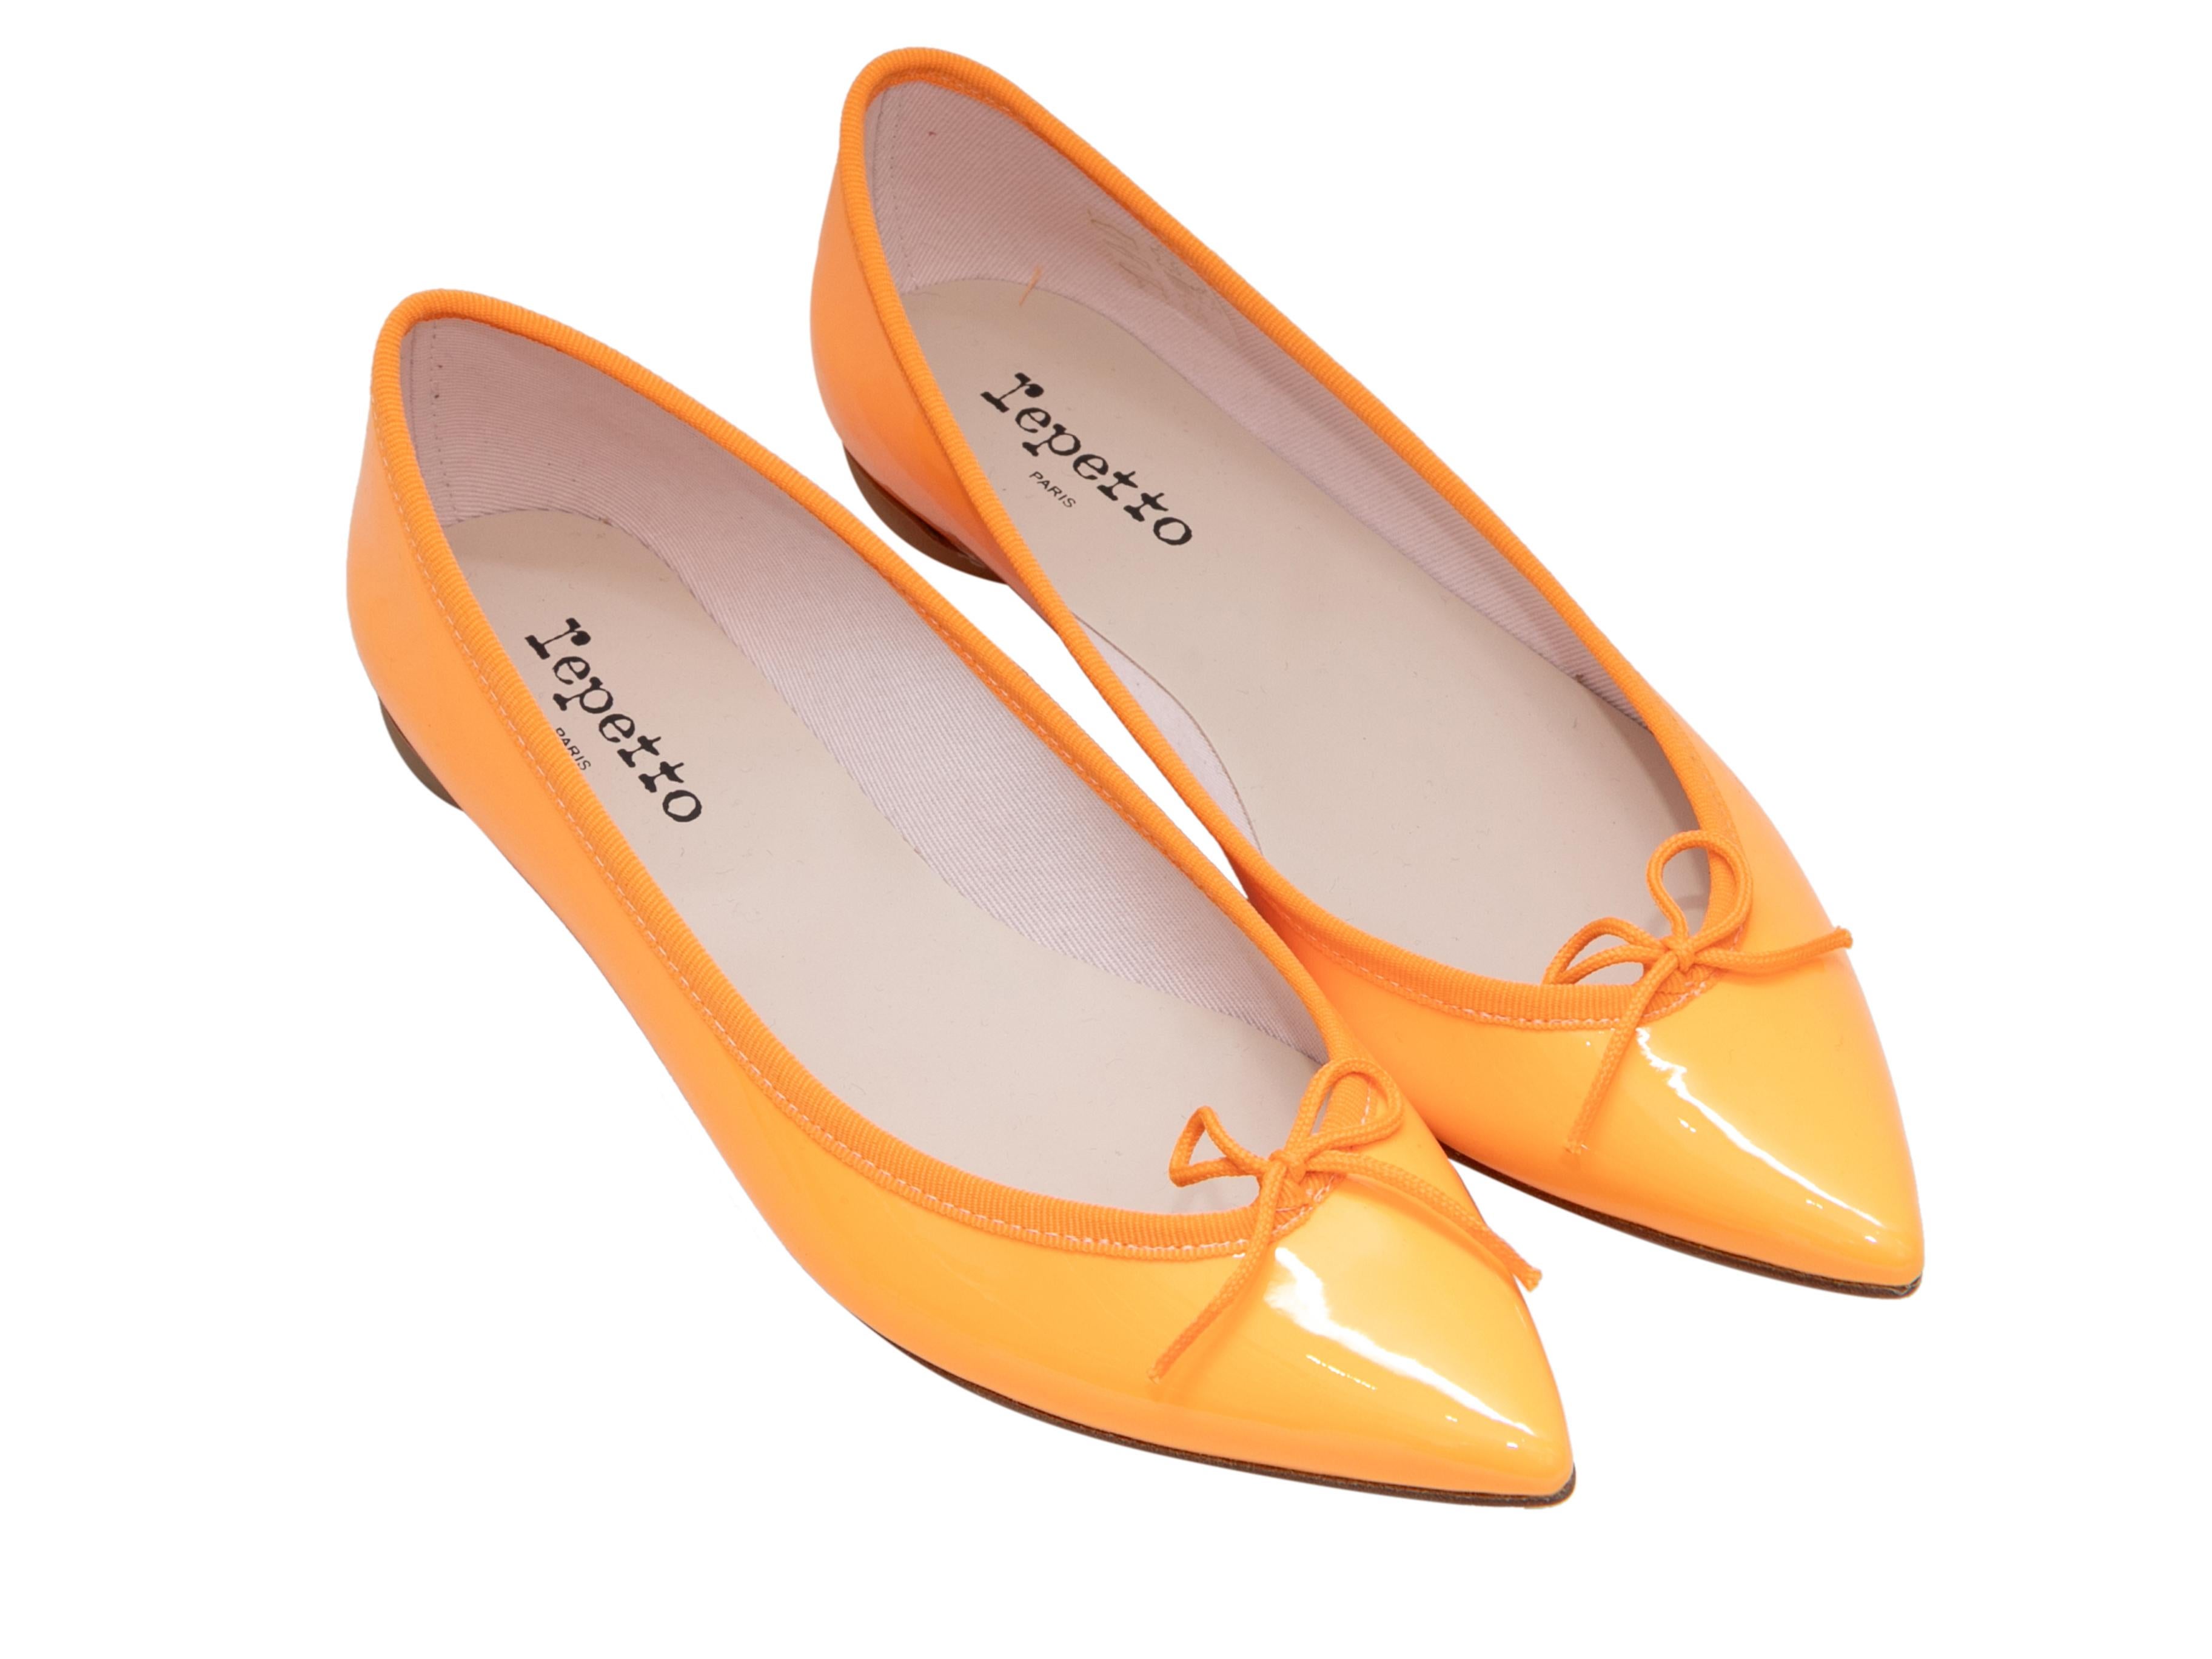 Marigold patent leather pointed-toe ballet flats by Repetto. Grosgrain trim and bow accents at tops. 0.25